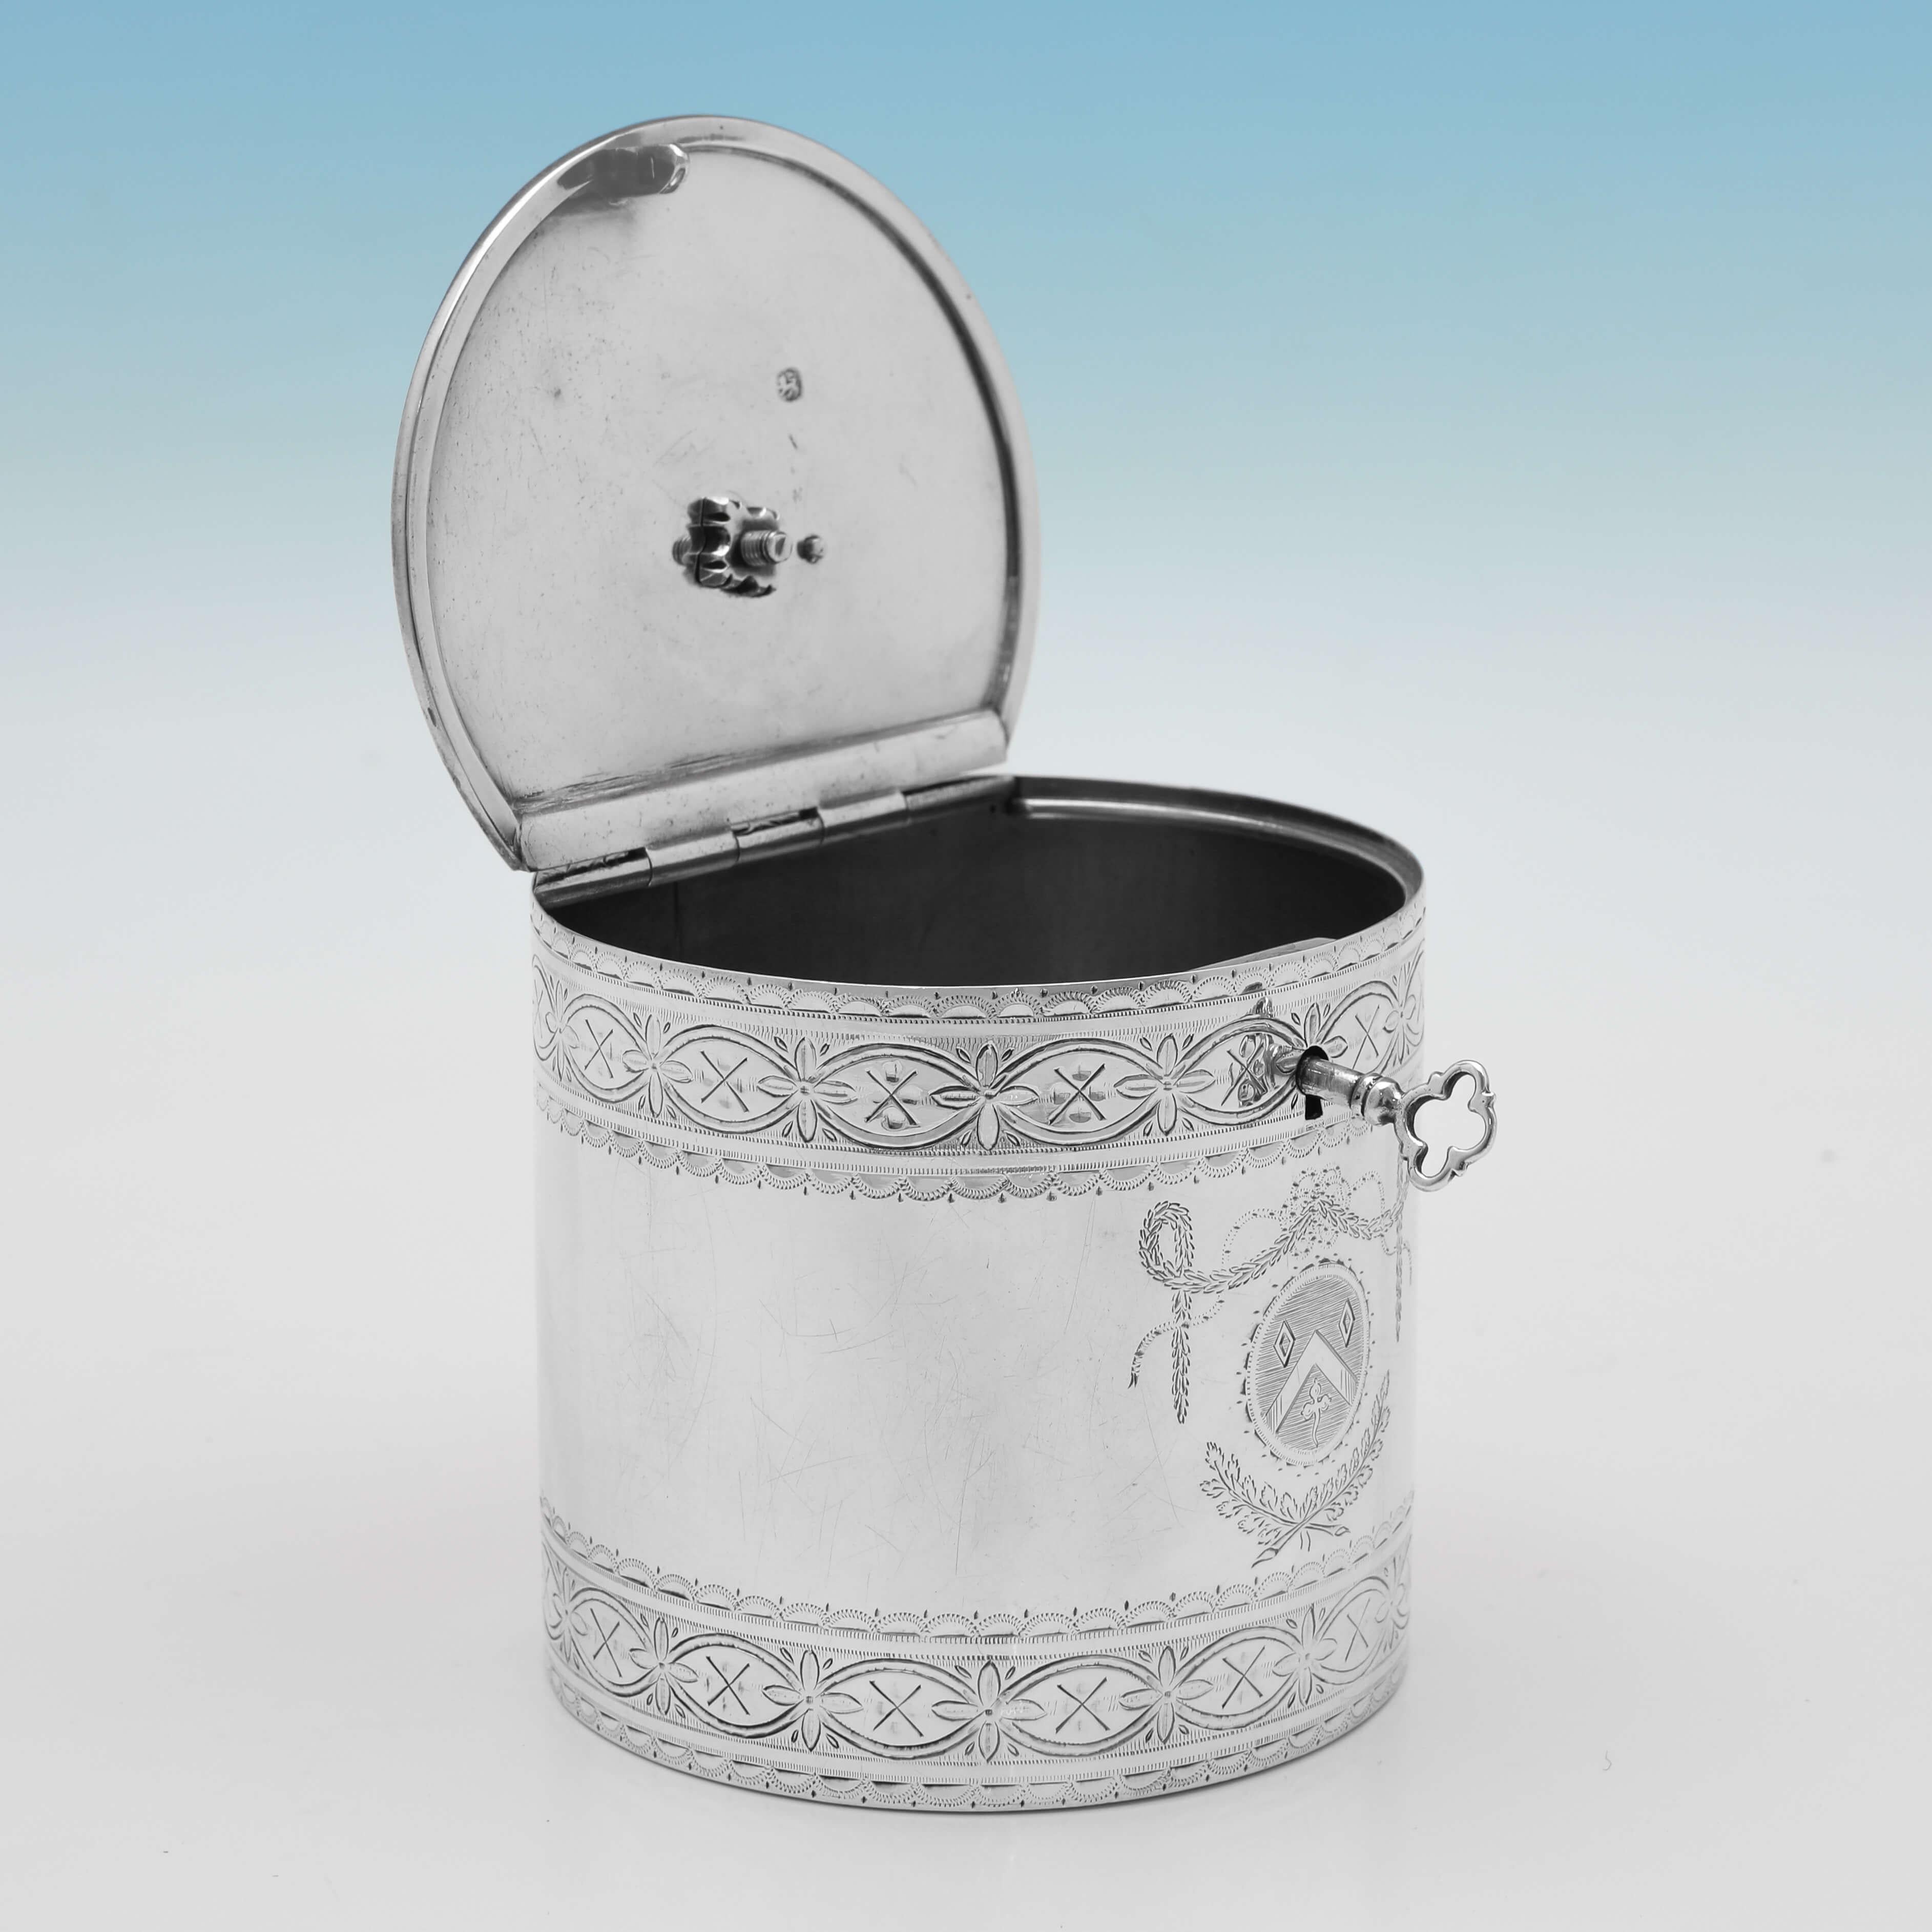 Hallmarked in London in 1775 by Walter Brind, this charming, George III period, Antique, Sterling Silver Tea Caddy, is cylindrical in shape, with wonderful engraved decoration to the body and lid, the original key, and an engraved armorial to the